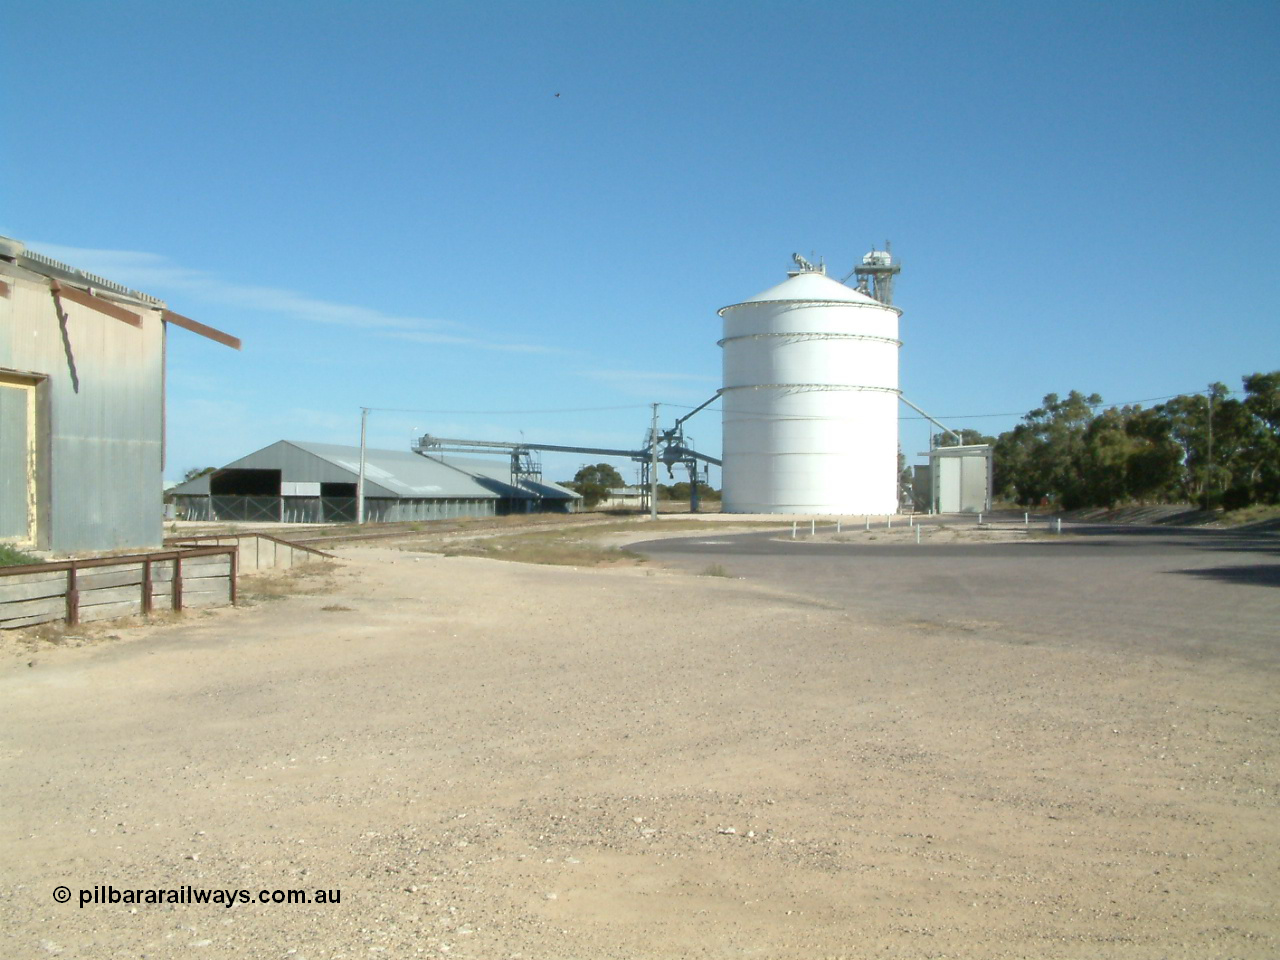 030405 155014
Lock, yard view with goods shed on the left, horizontal grain shed and Ascom style silo complex, known as Block 5, 5th April 2003.
